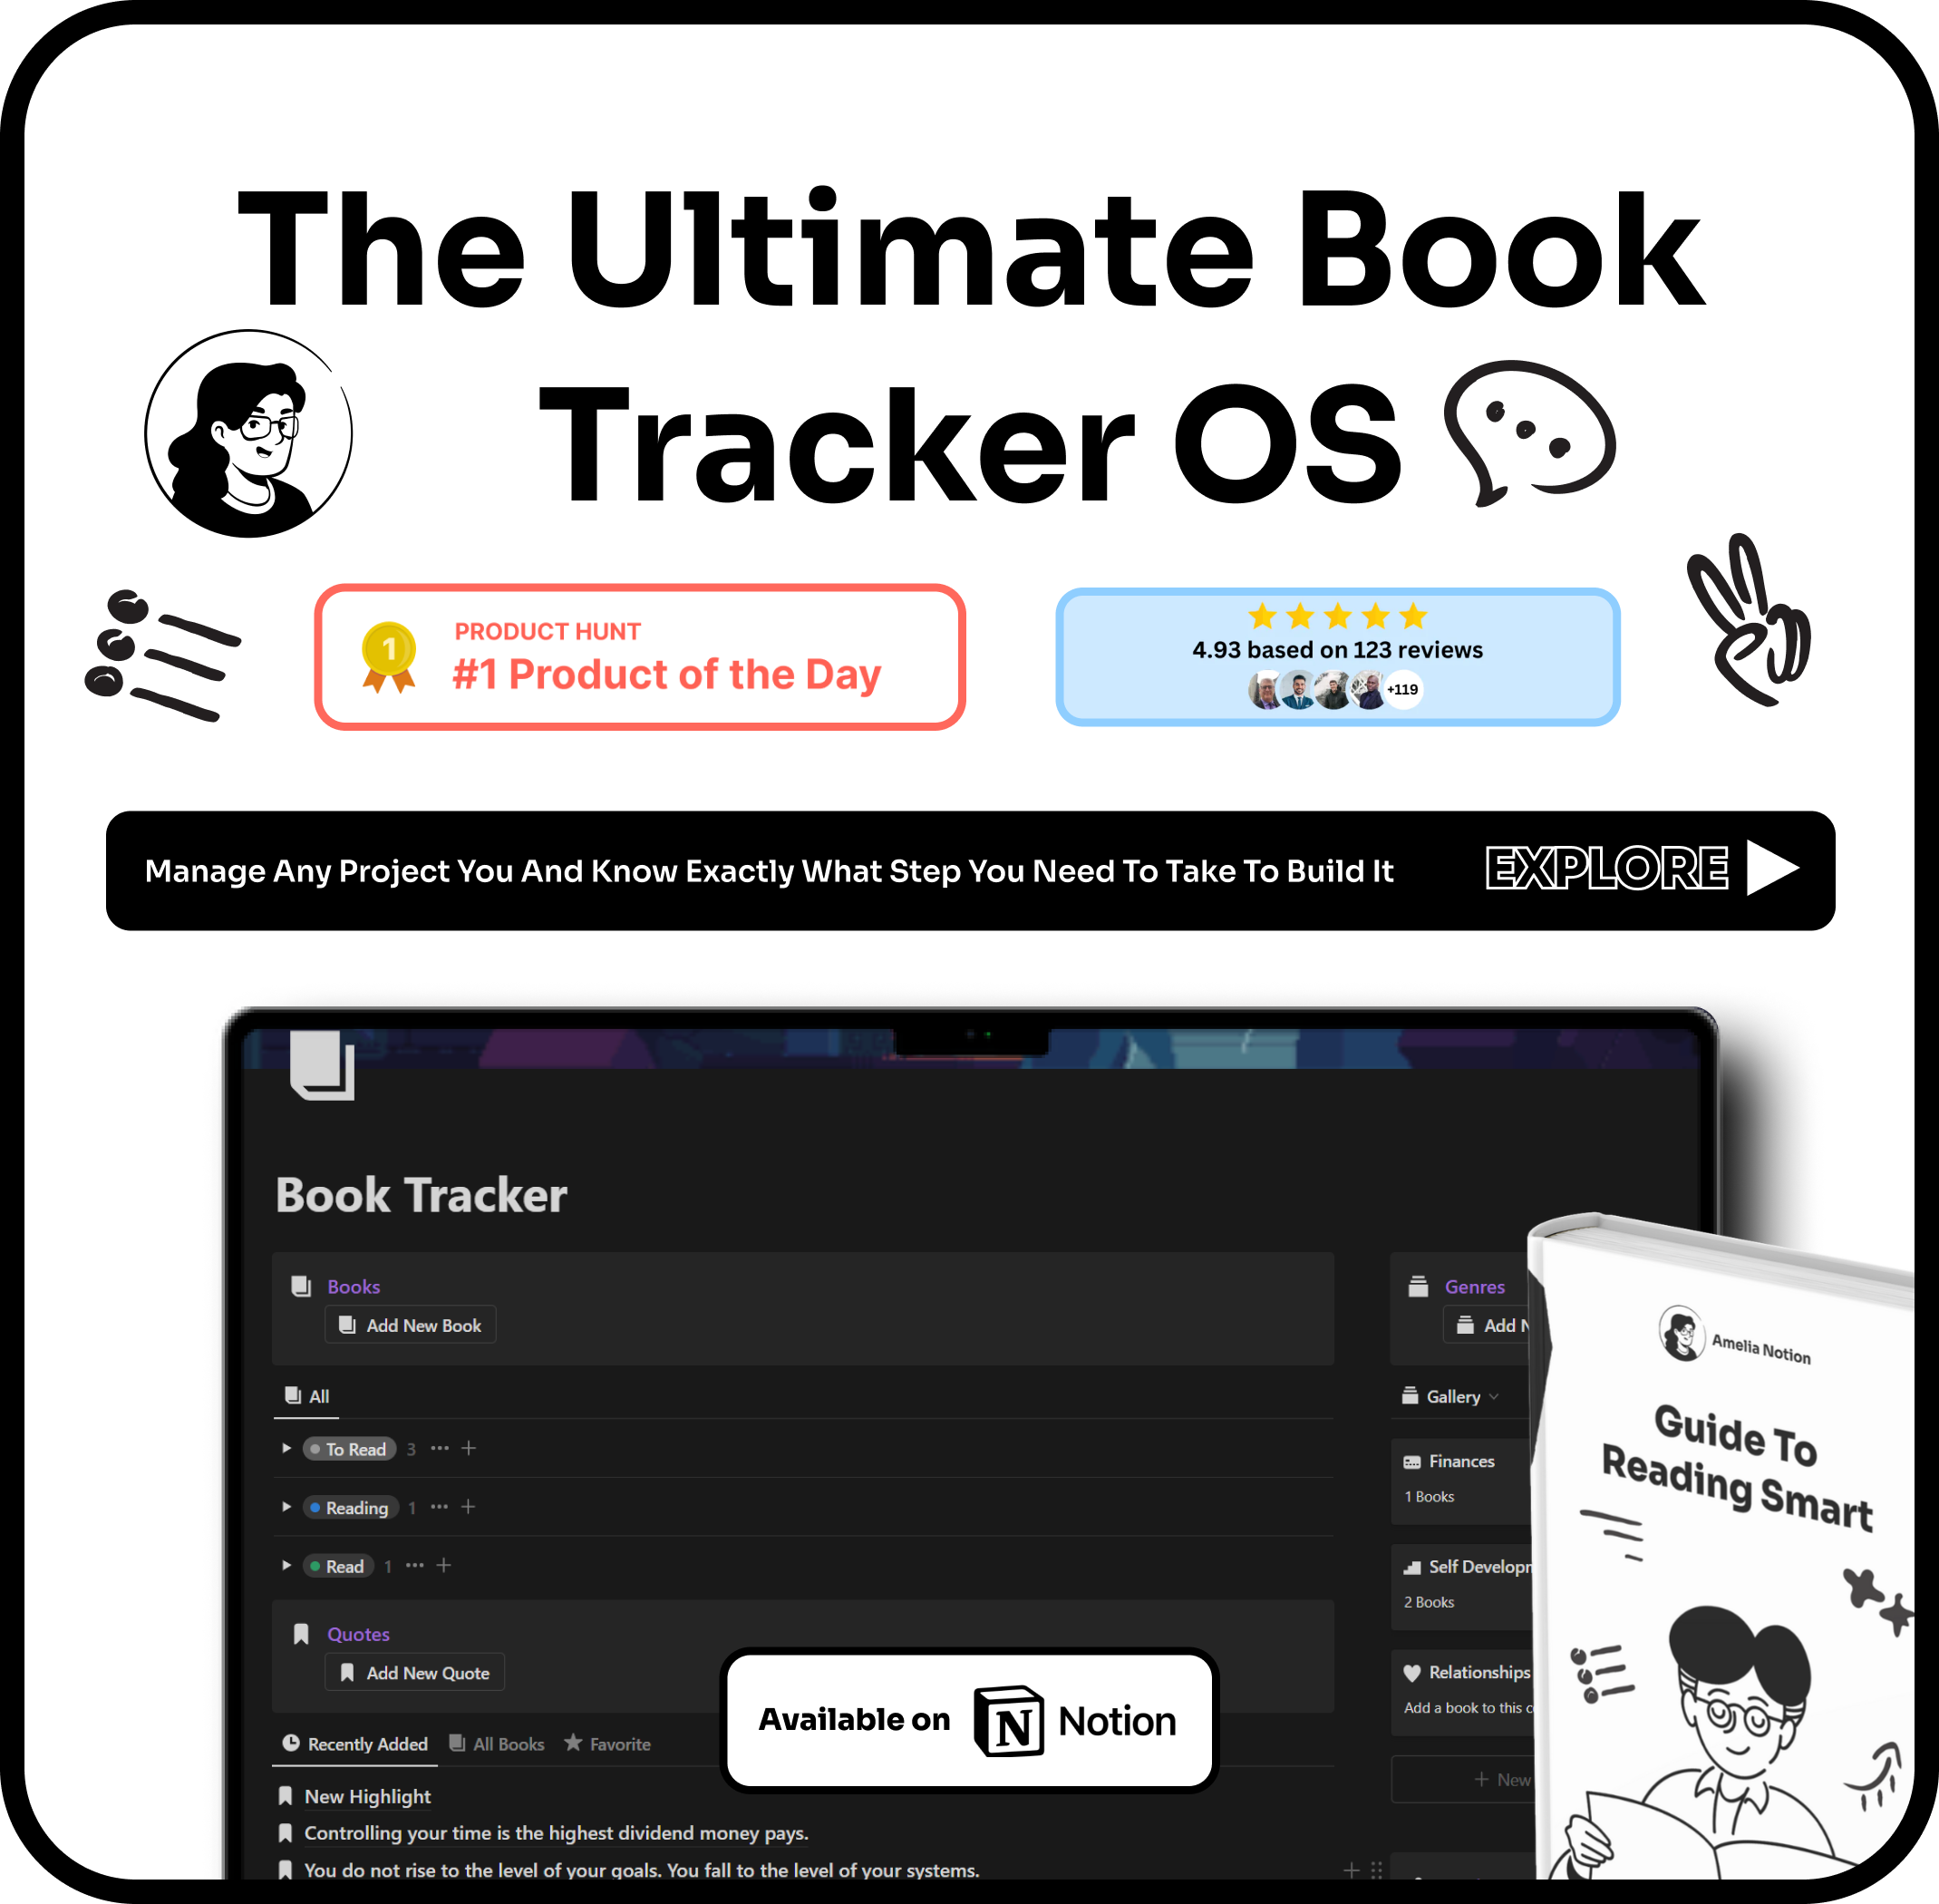 The Ultimate Book Tracker